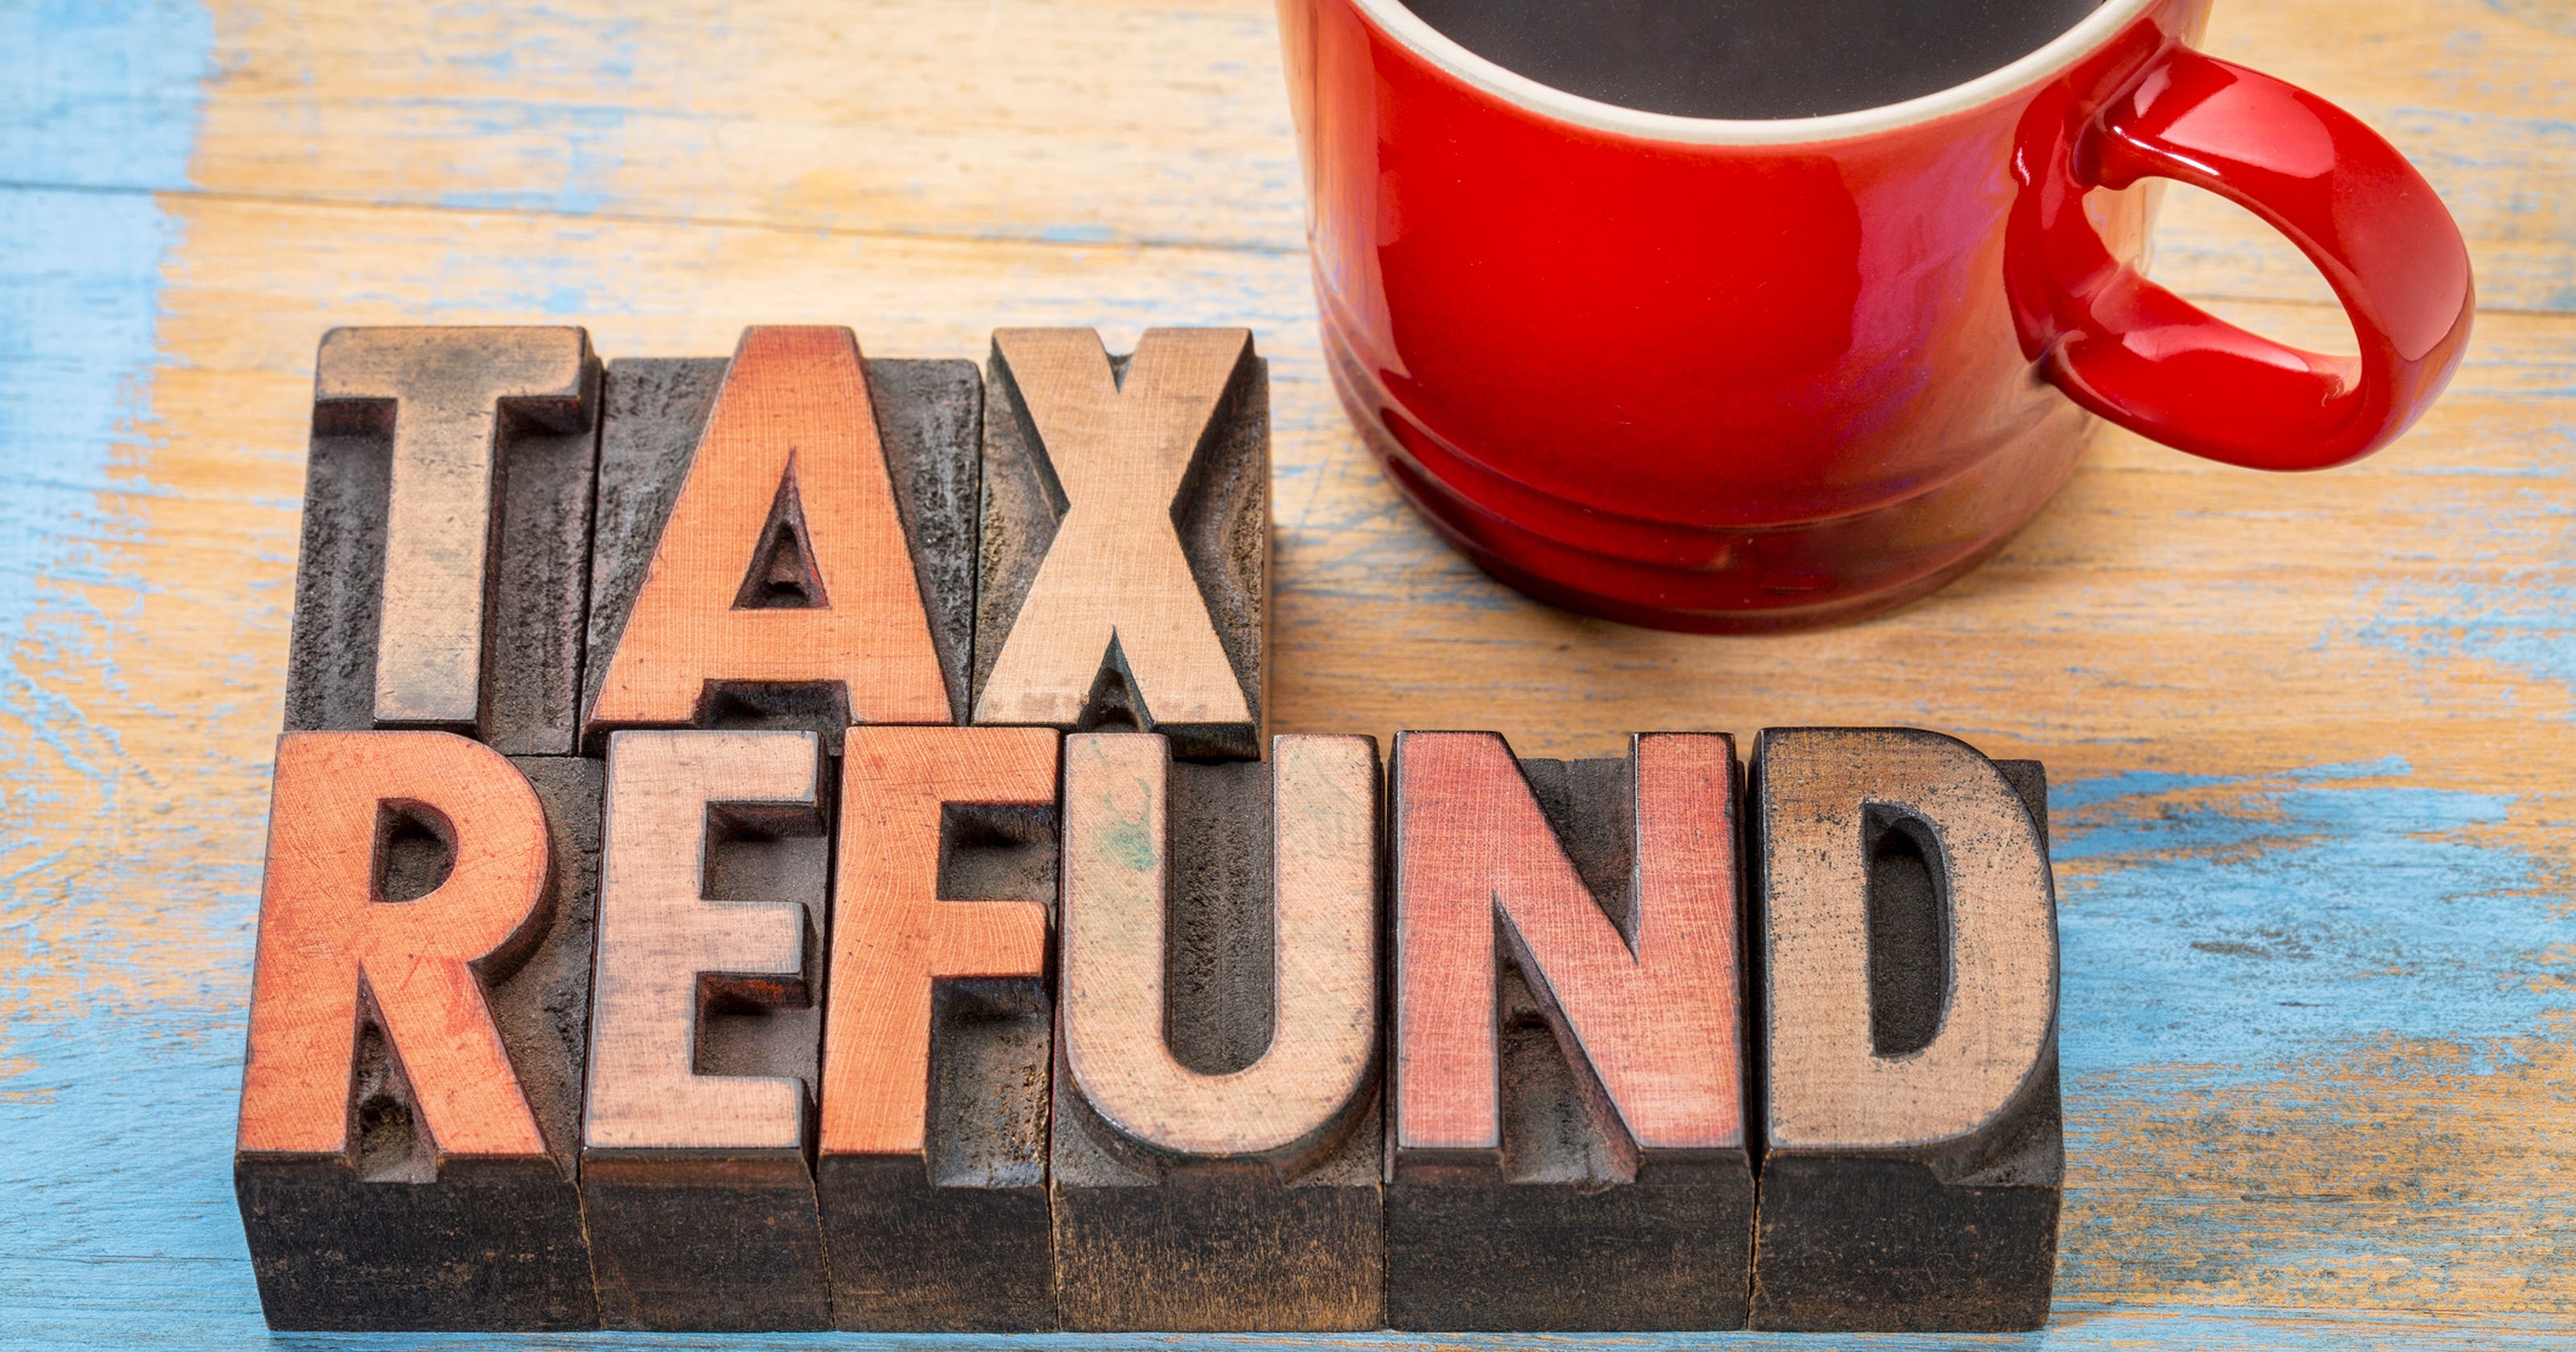 taxes-2019-why-is-my-refund-smaller-this-year